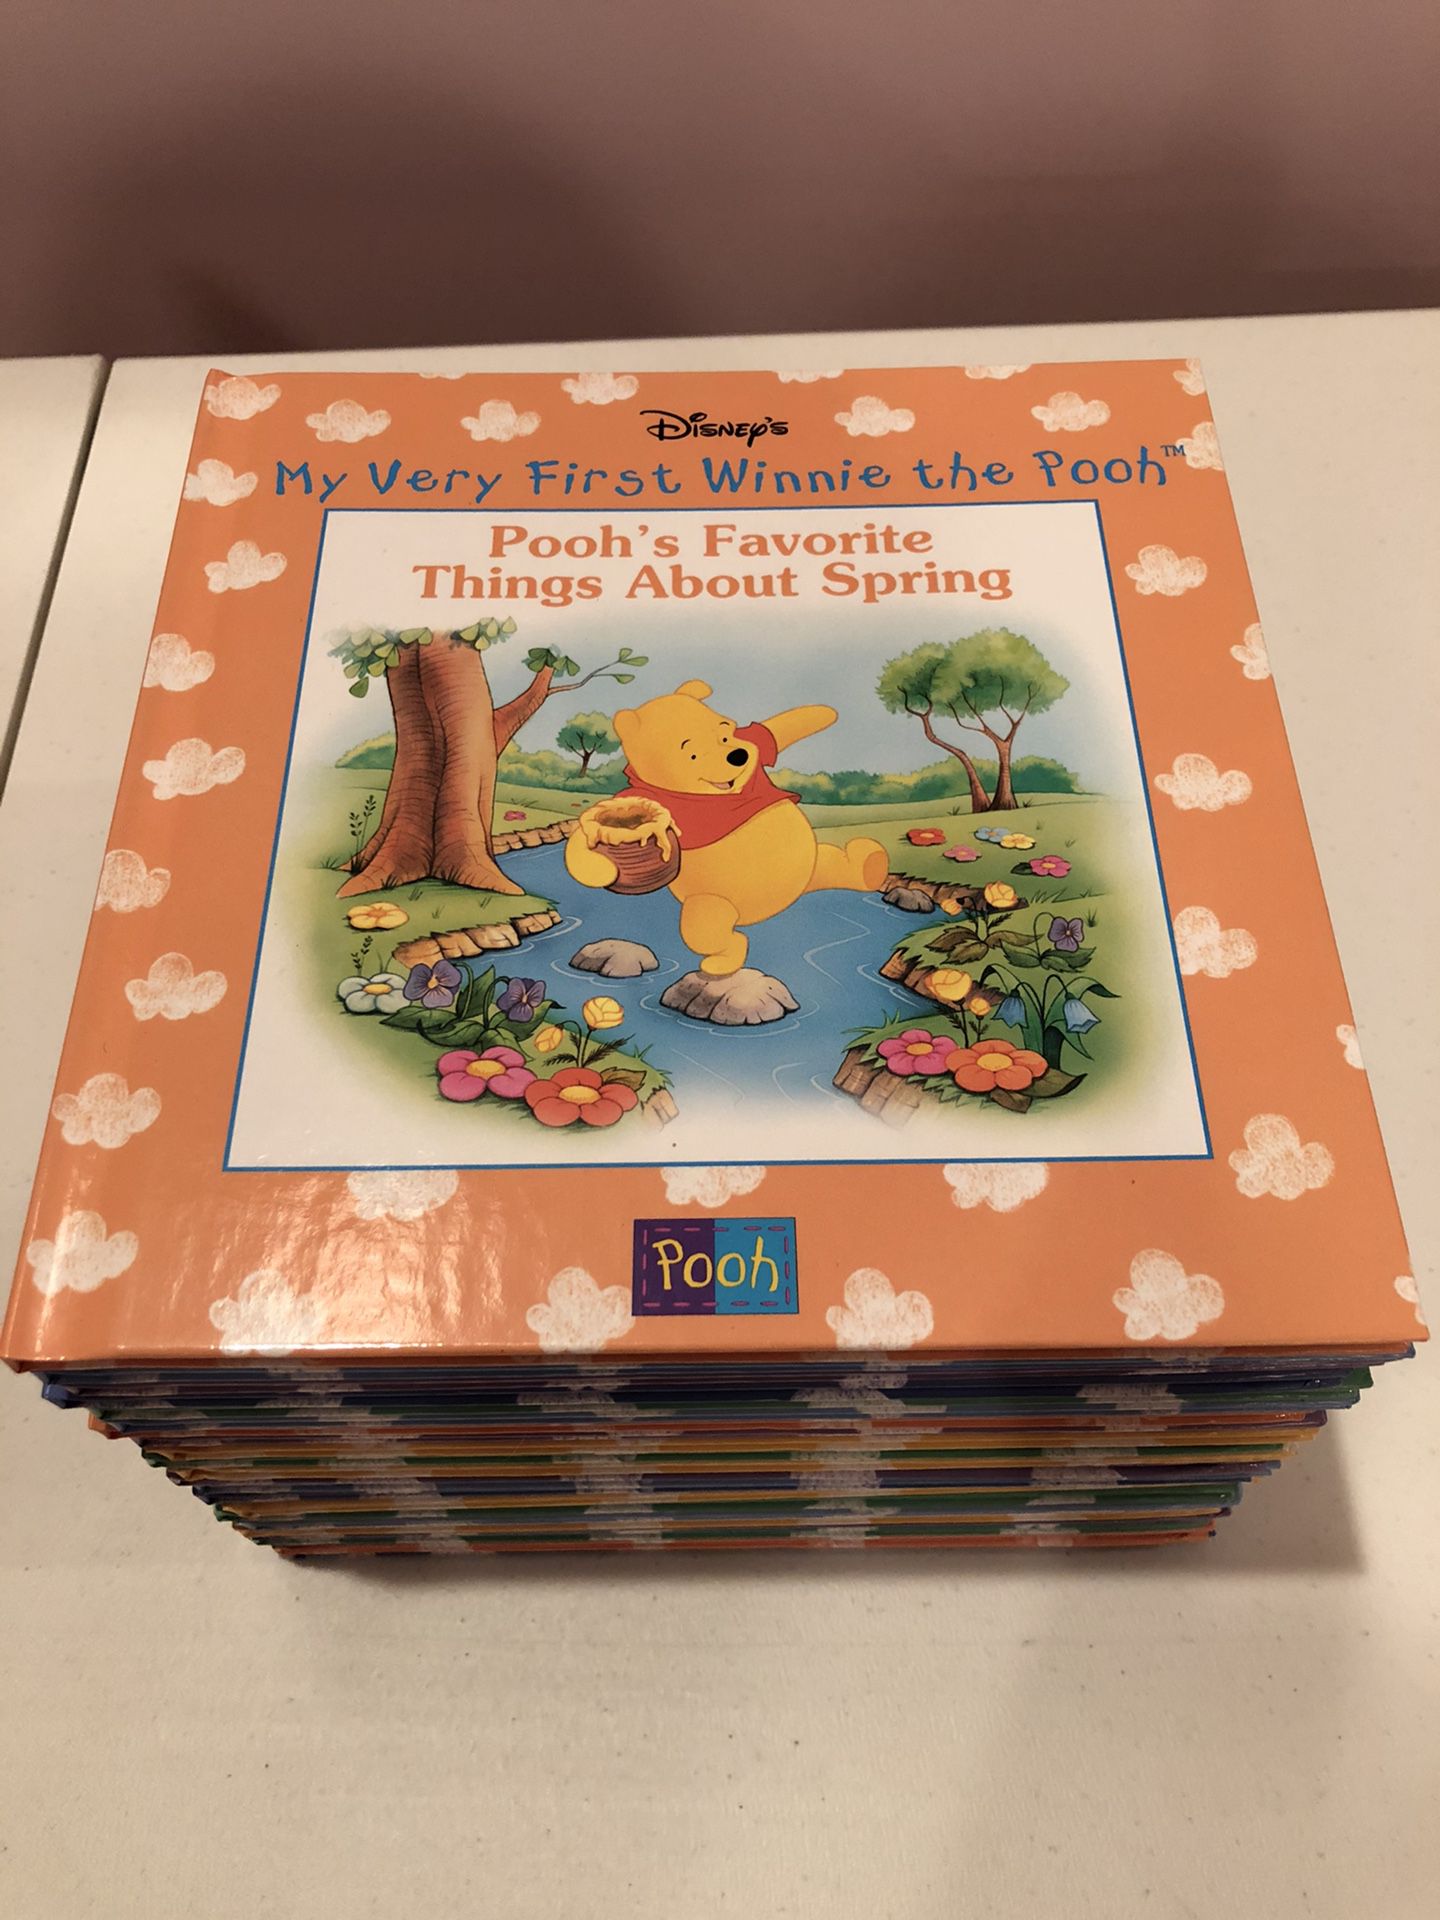 22 books from Disney’s “My Very First Winnie The Pooh” book series